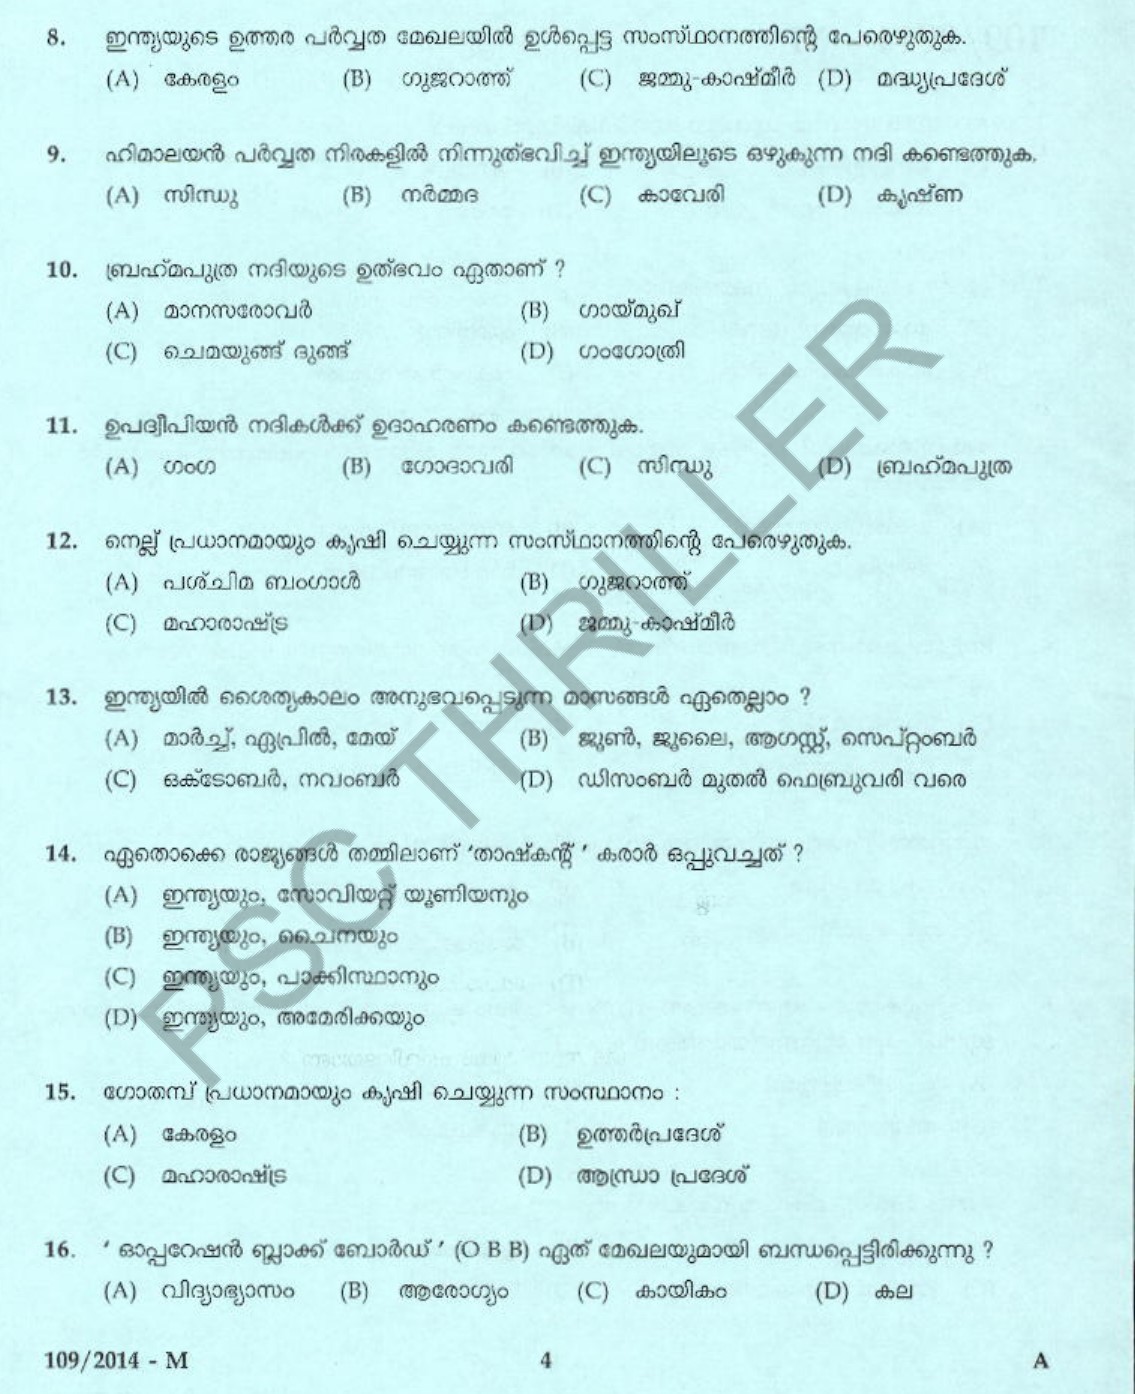 Peon- Question Paper with Answer Key- 109/2014 - Kerala PSC